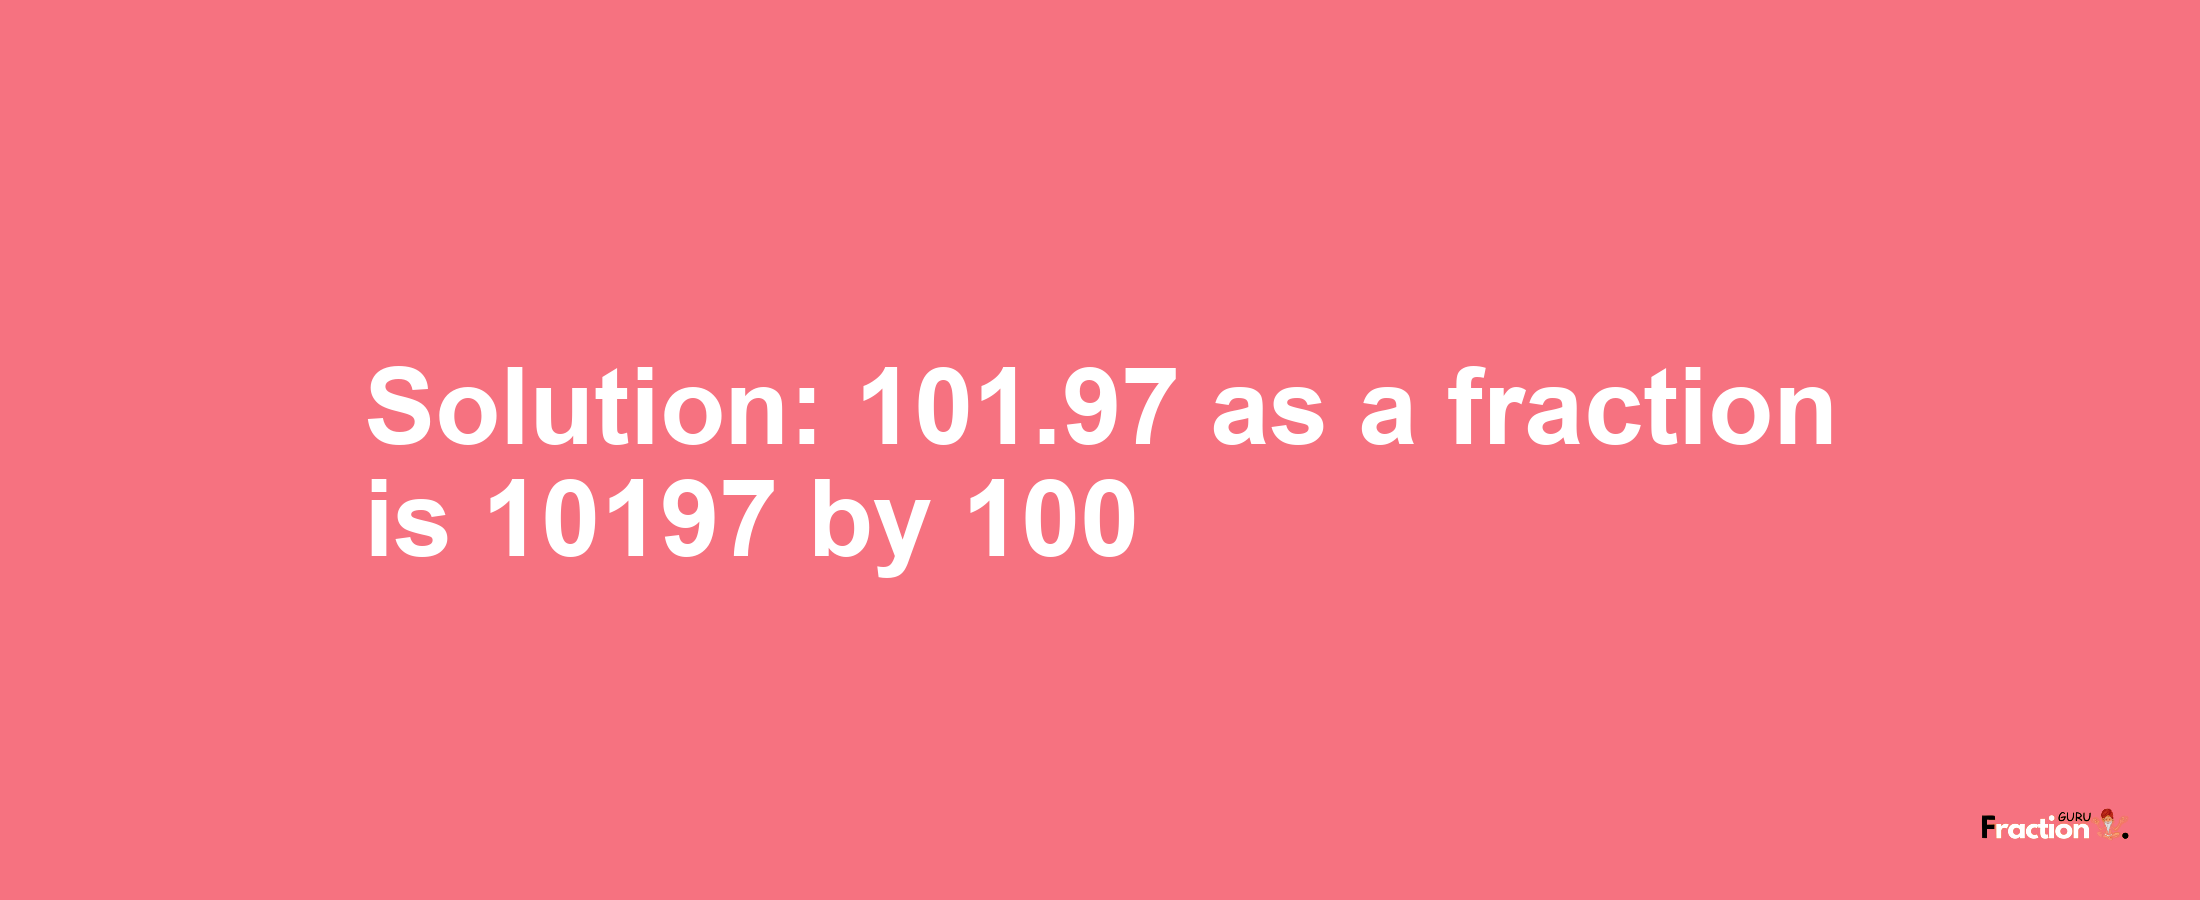 Solution:101.97 as a fraction is 10197/100